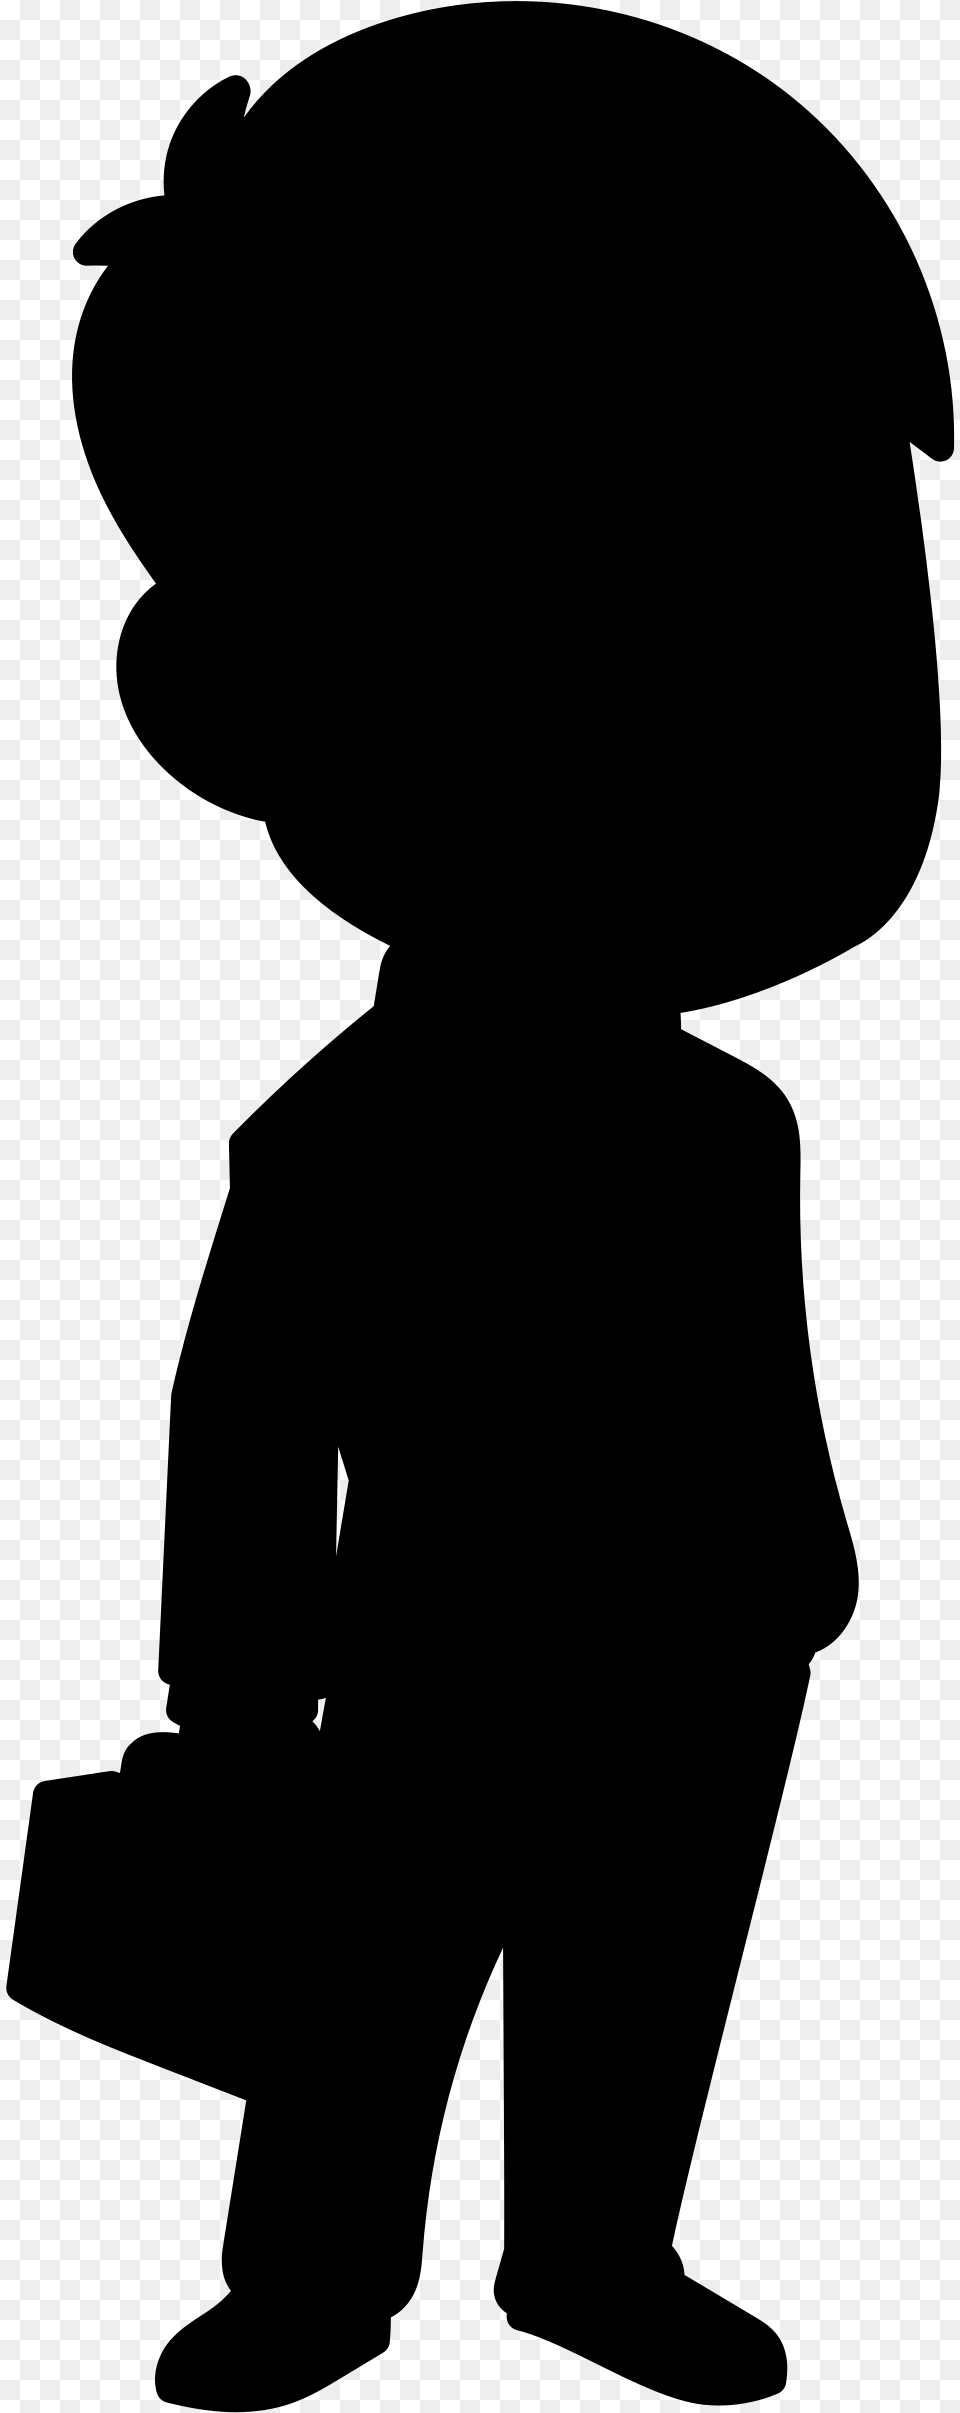 Human Behavior Shoulder Clip Art Silhouette Silhouette Of Child Head And Shoulders, Gray Png